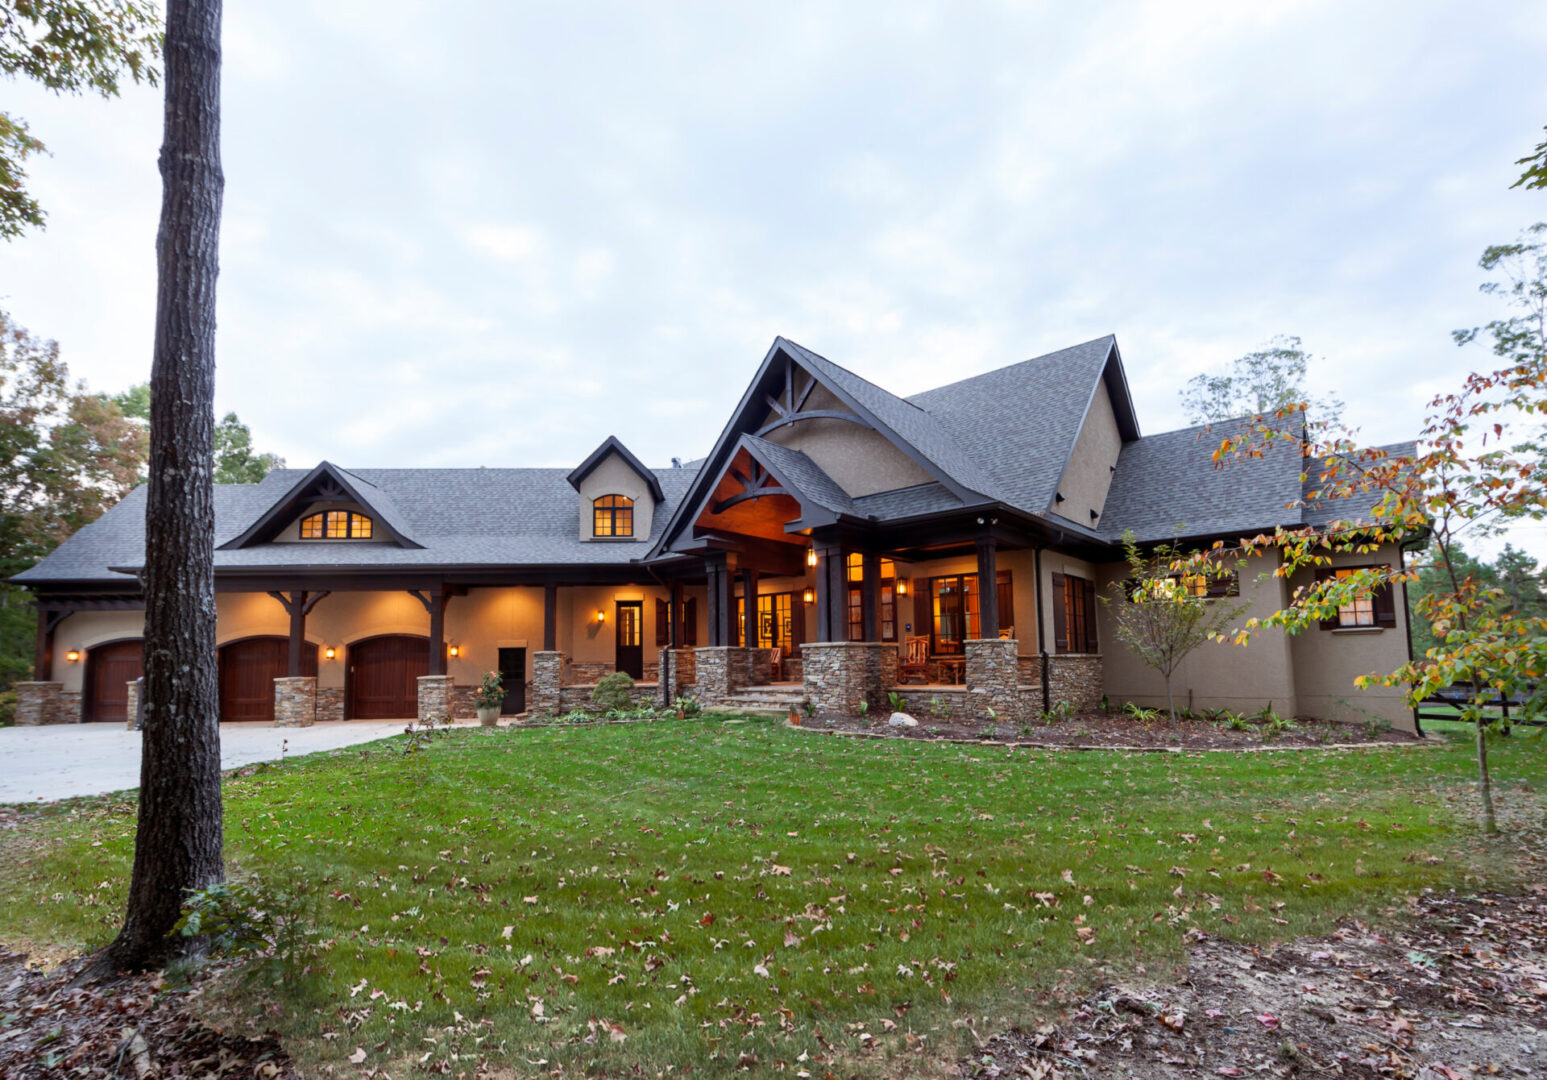 A large house with stone and wood accents.